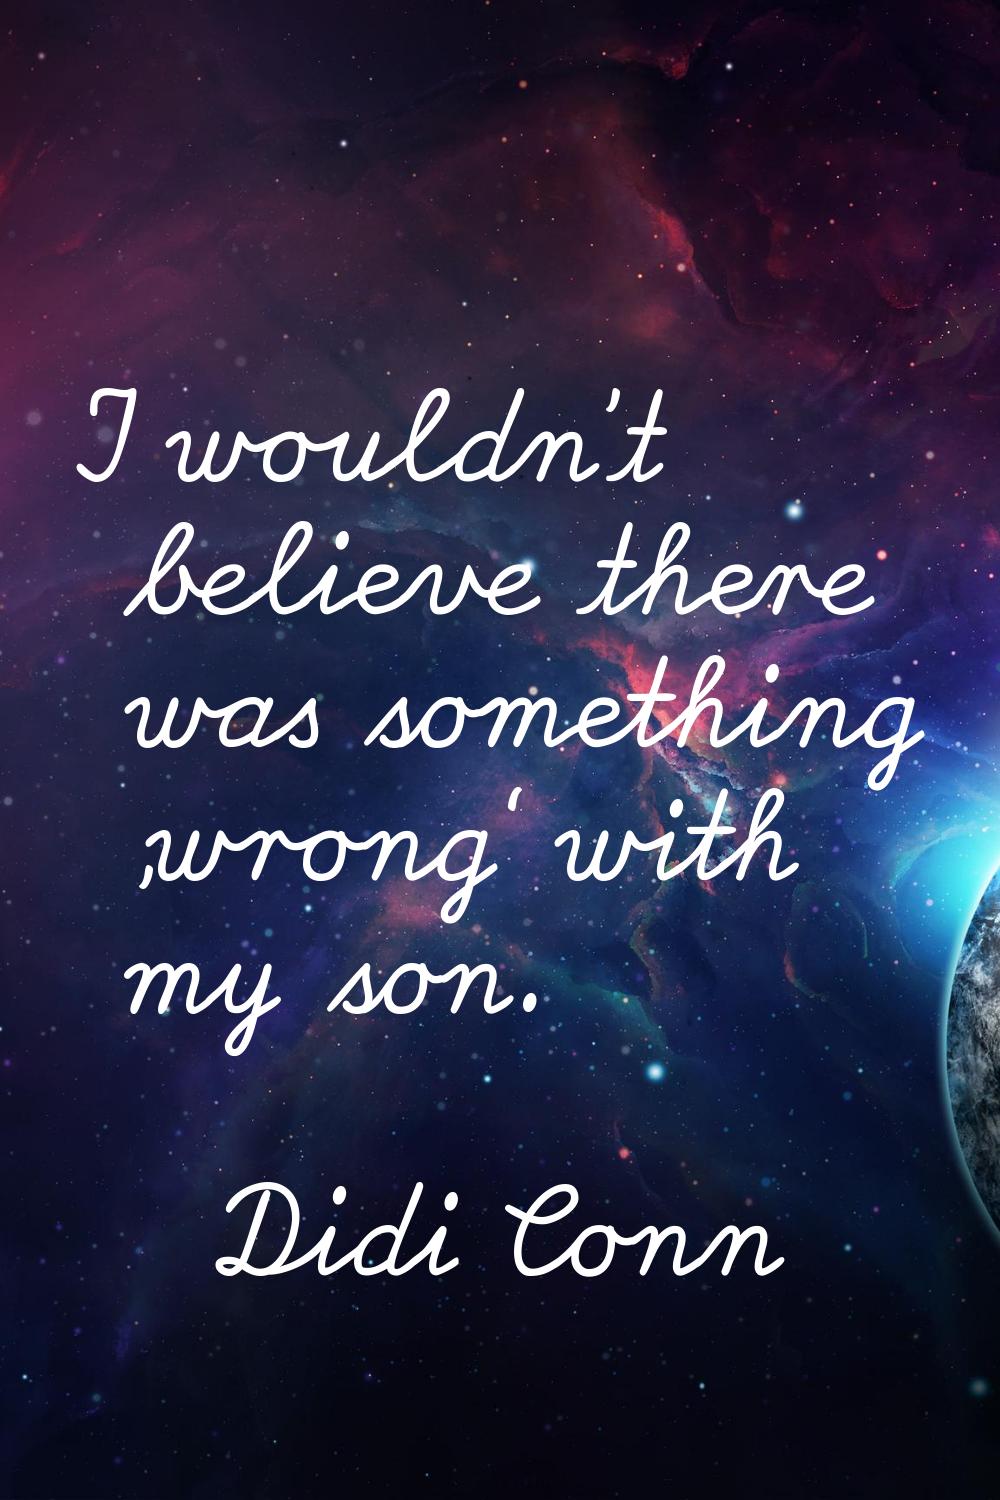 I wouldn't believe there was something 'wrong' with my son.